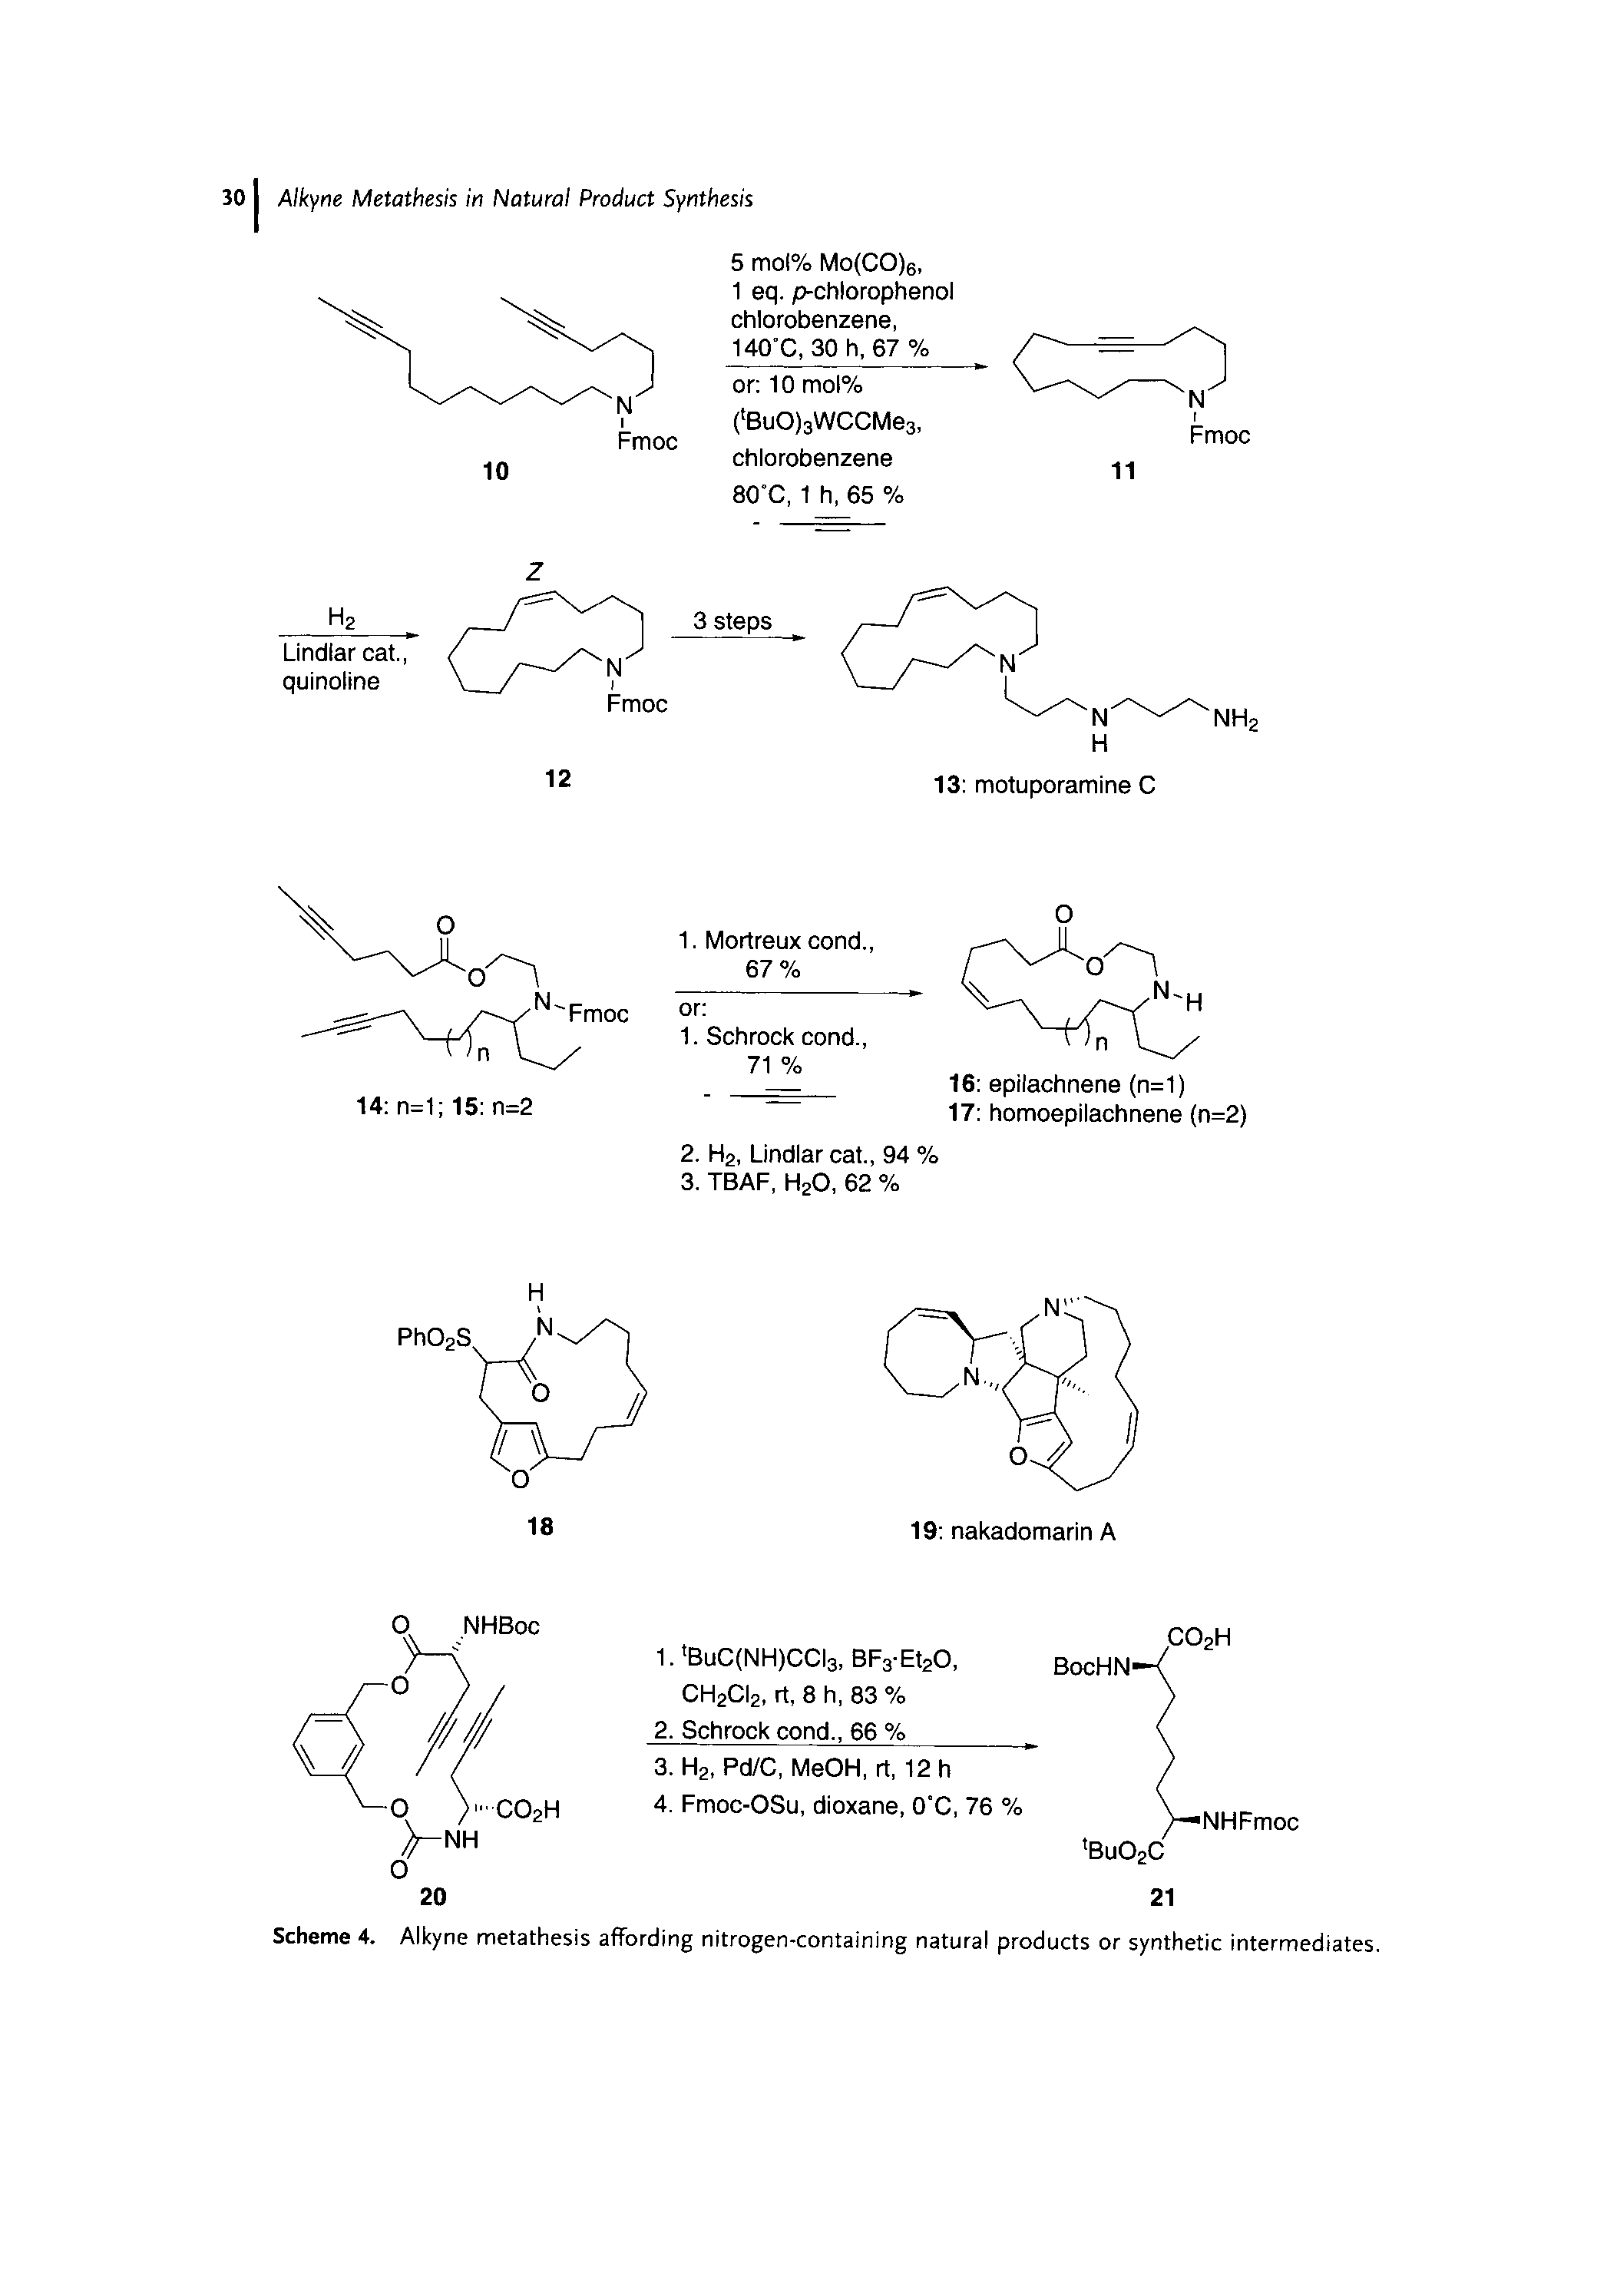 Scheme 4. Alkyne metathesis affording nitrogen-containing natural products or synthetic intermediates.